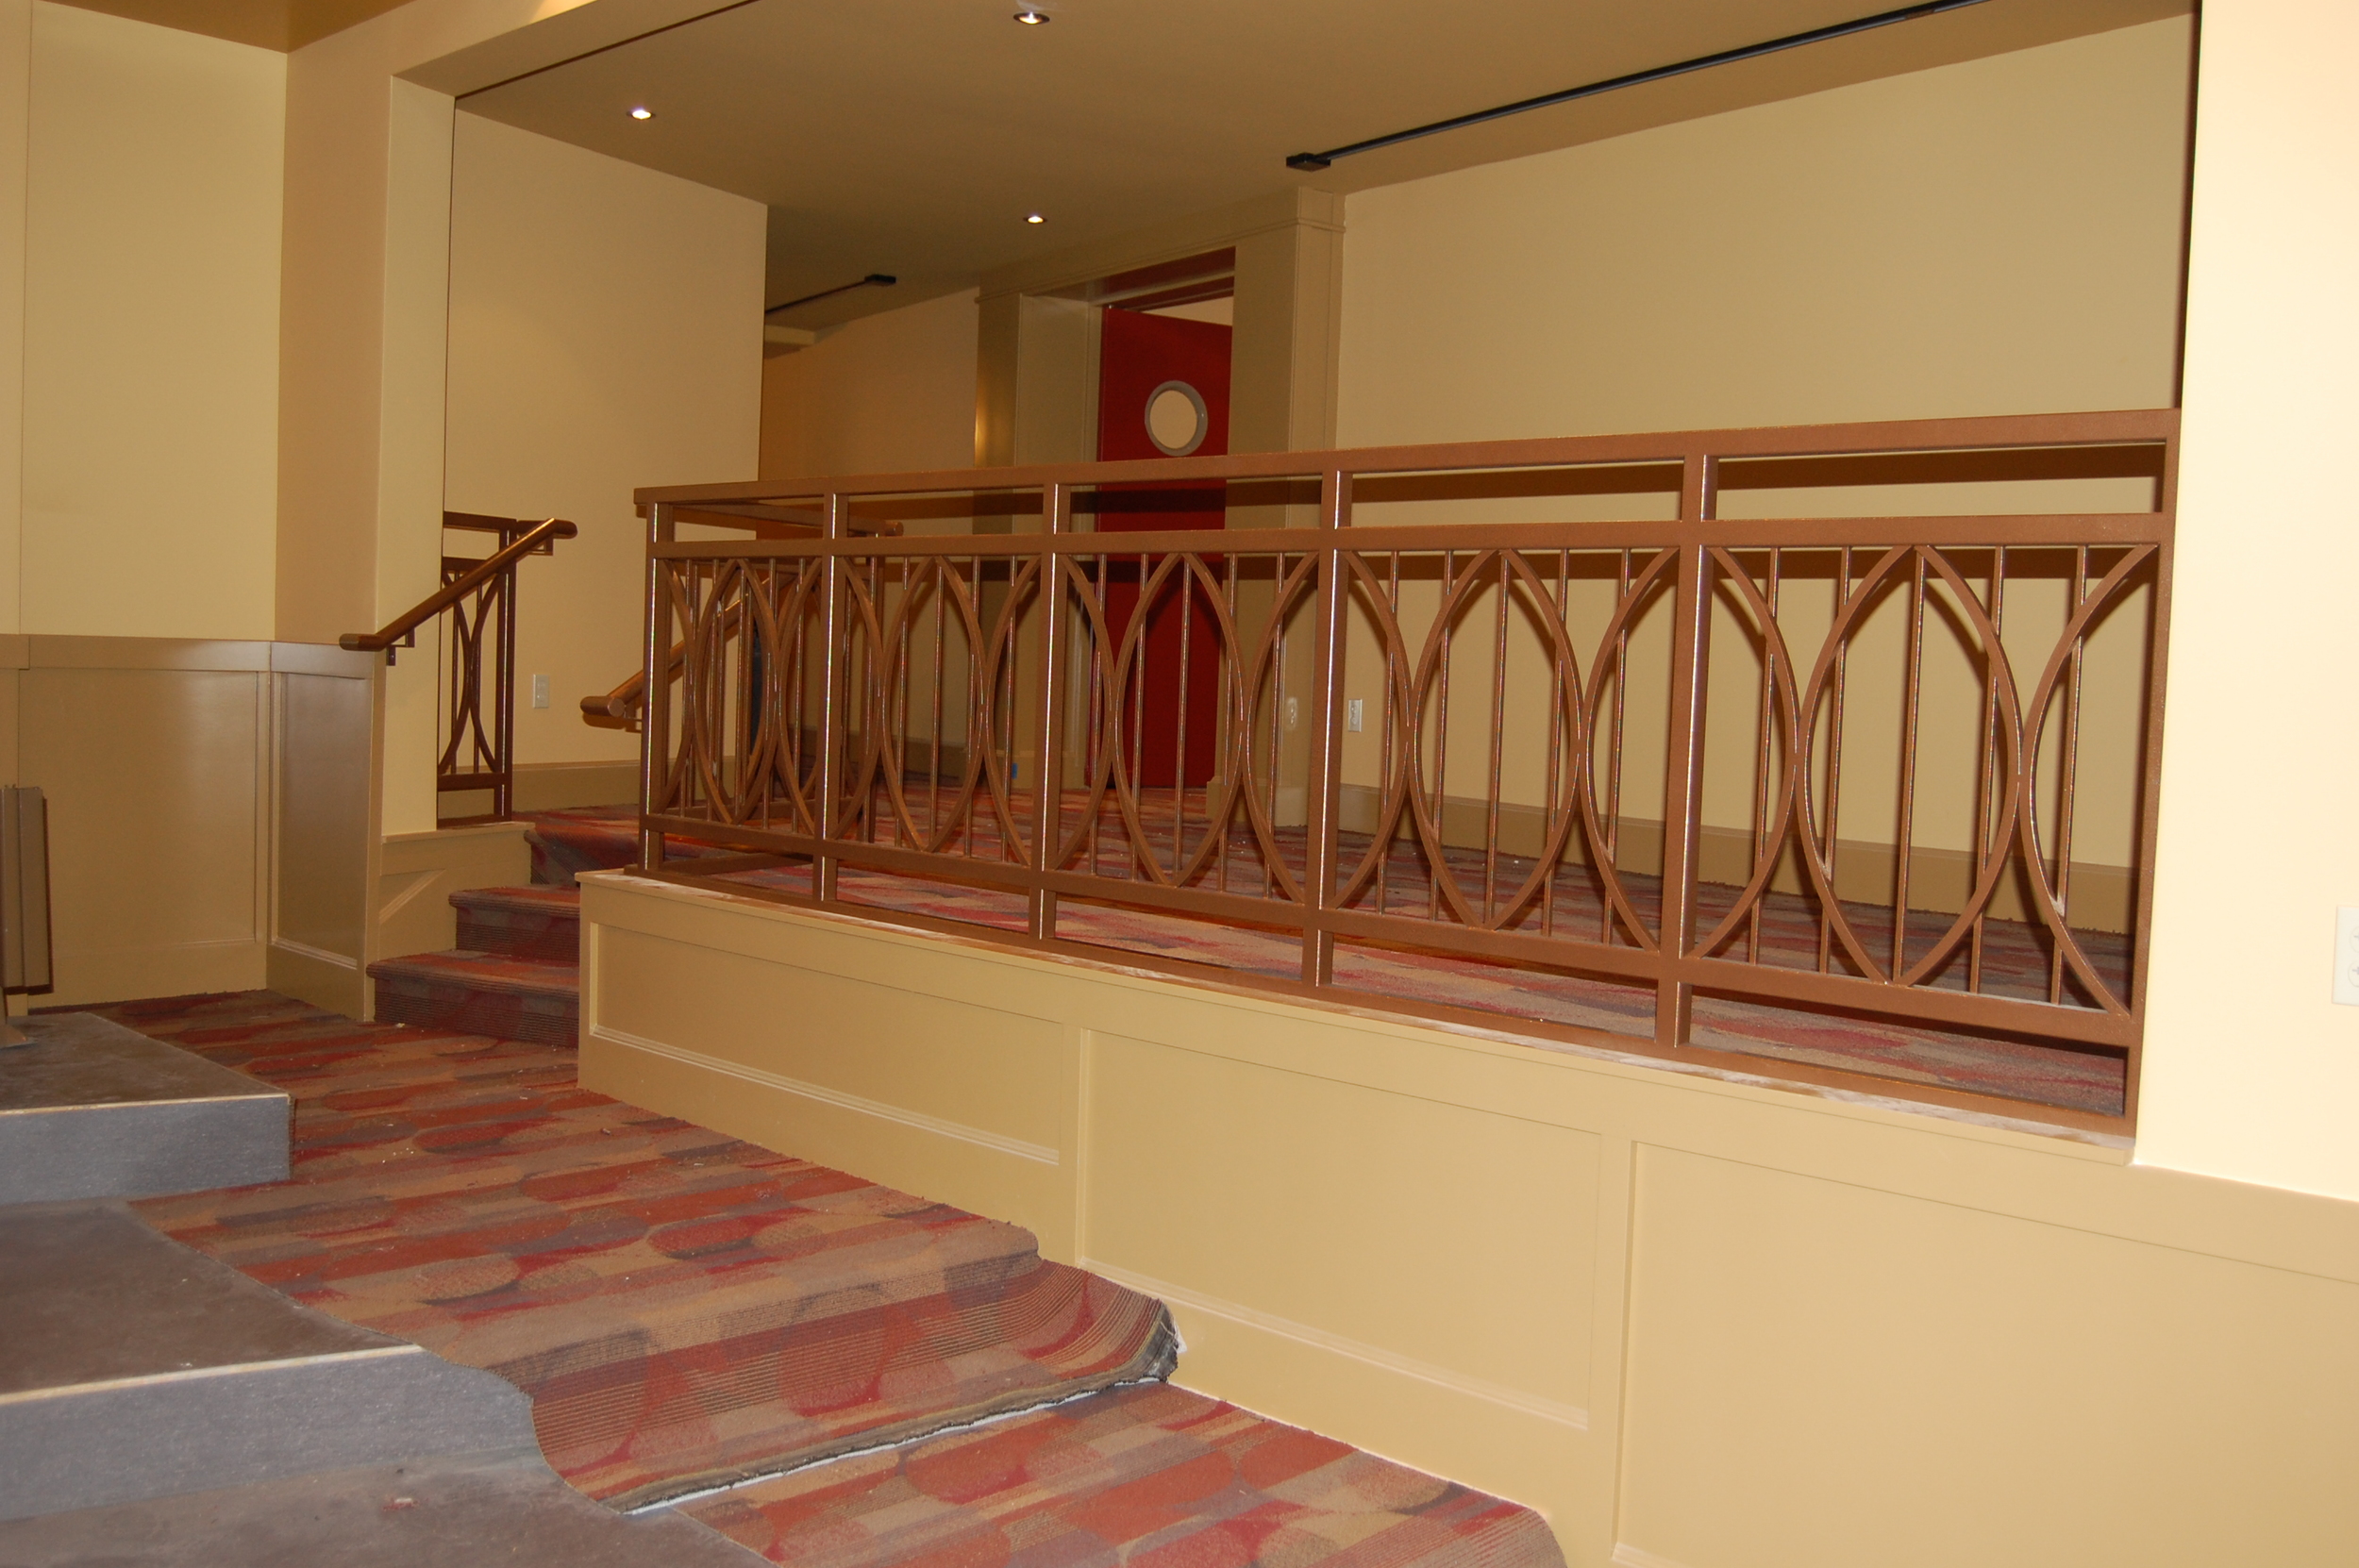  Painted steel railing for a home movie theater.  Designed by Group Jake Collaborative 